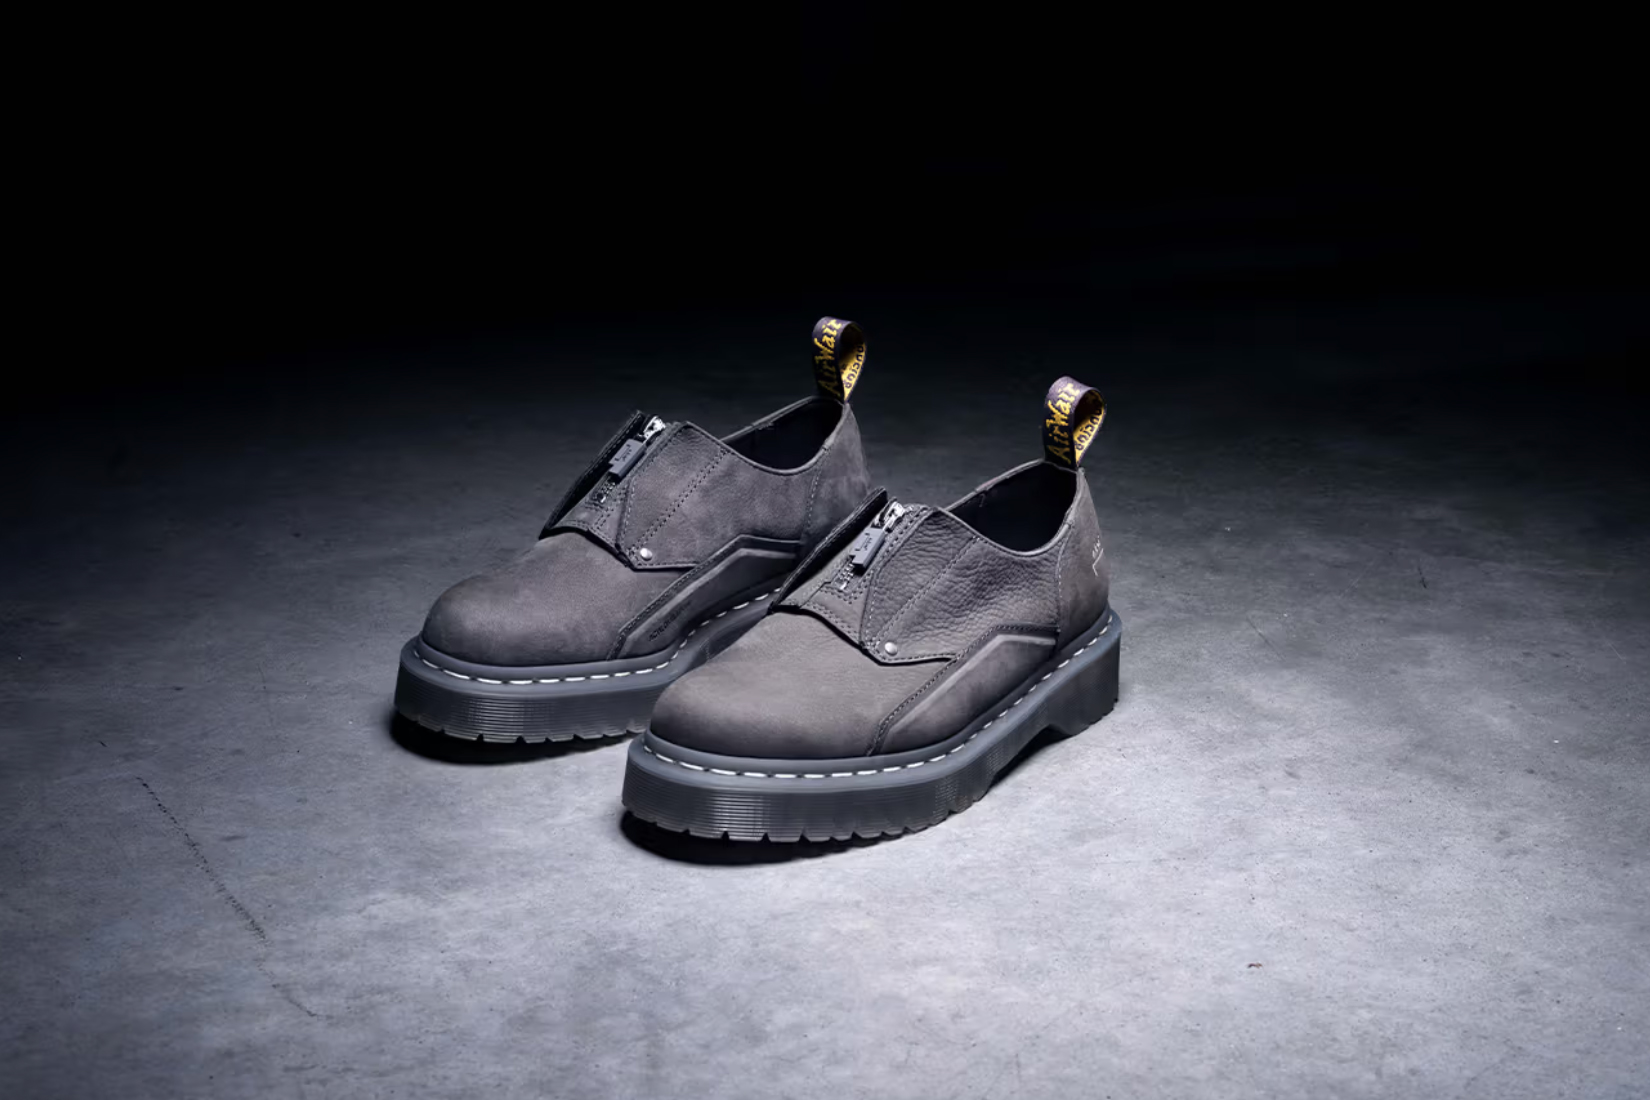 A-COLD-WALL* & Dr. Martens Drop a Utilitarian-Indebted 1461 Oxford Shoe